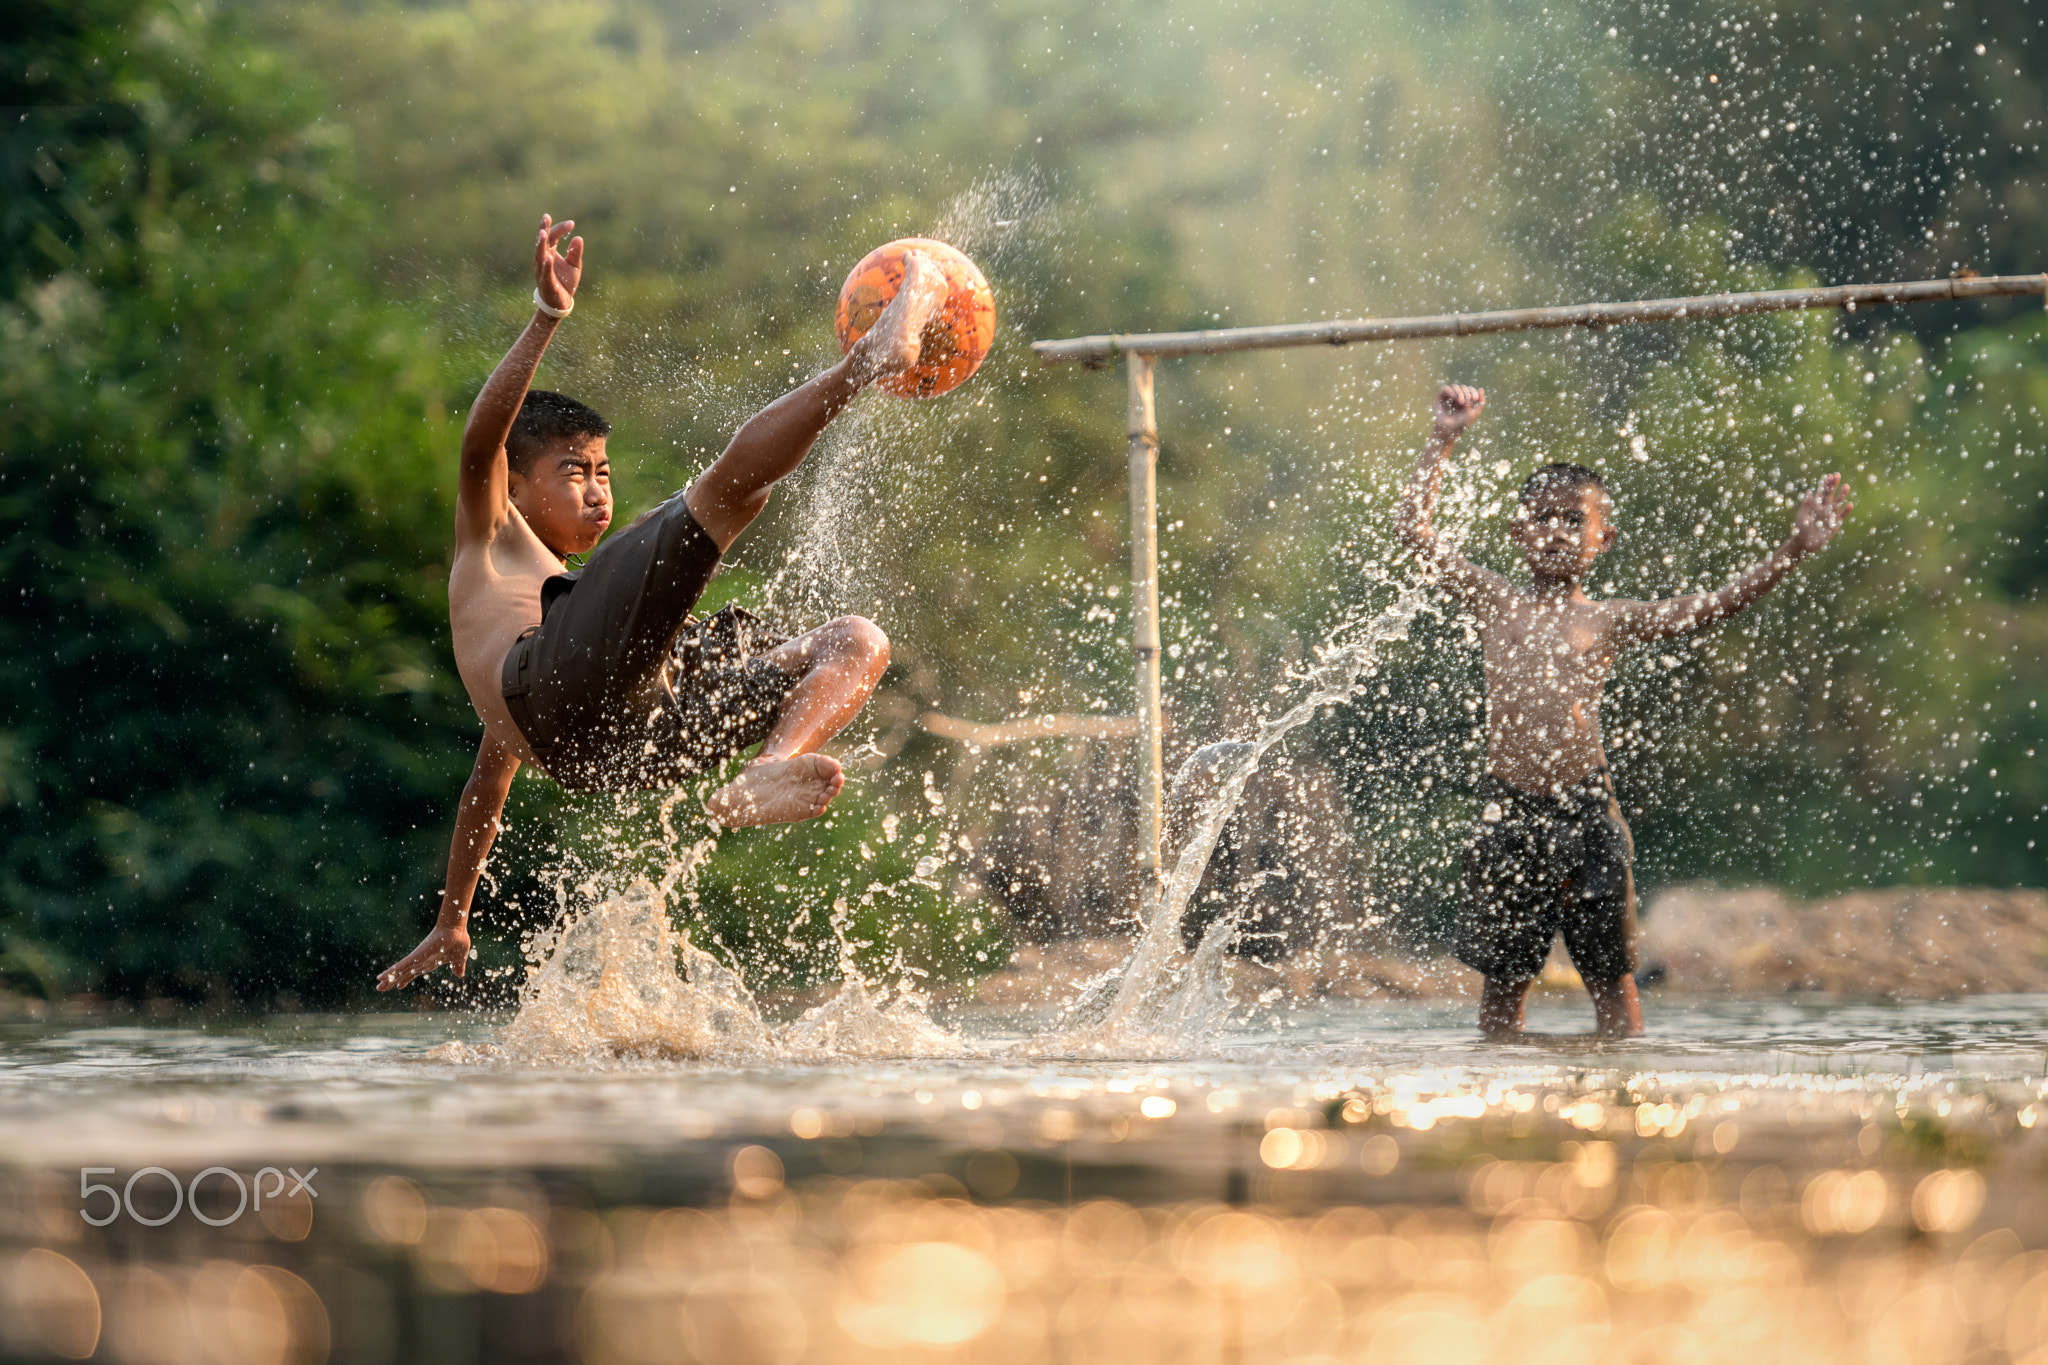 Boy kicking football in the river